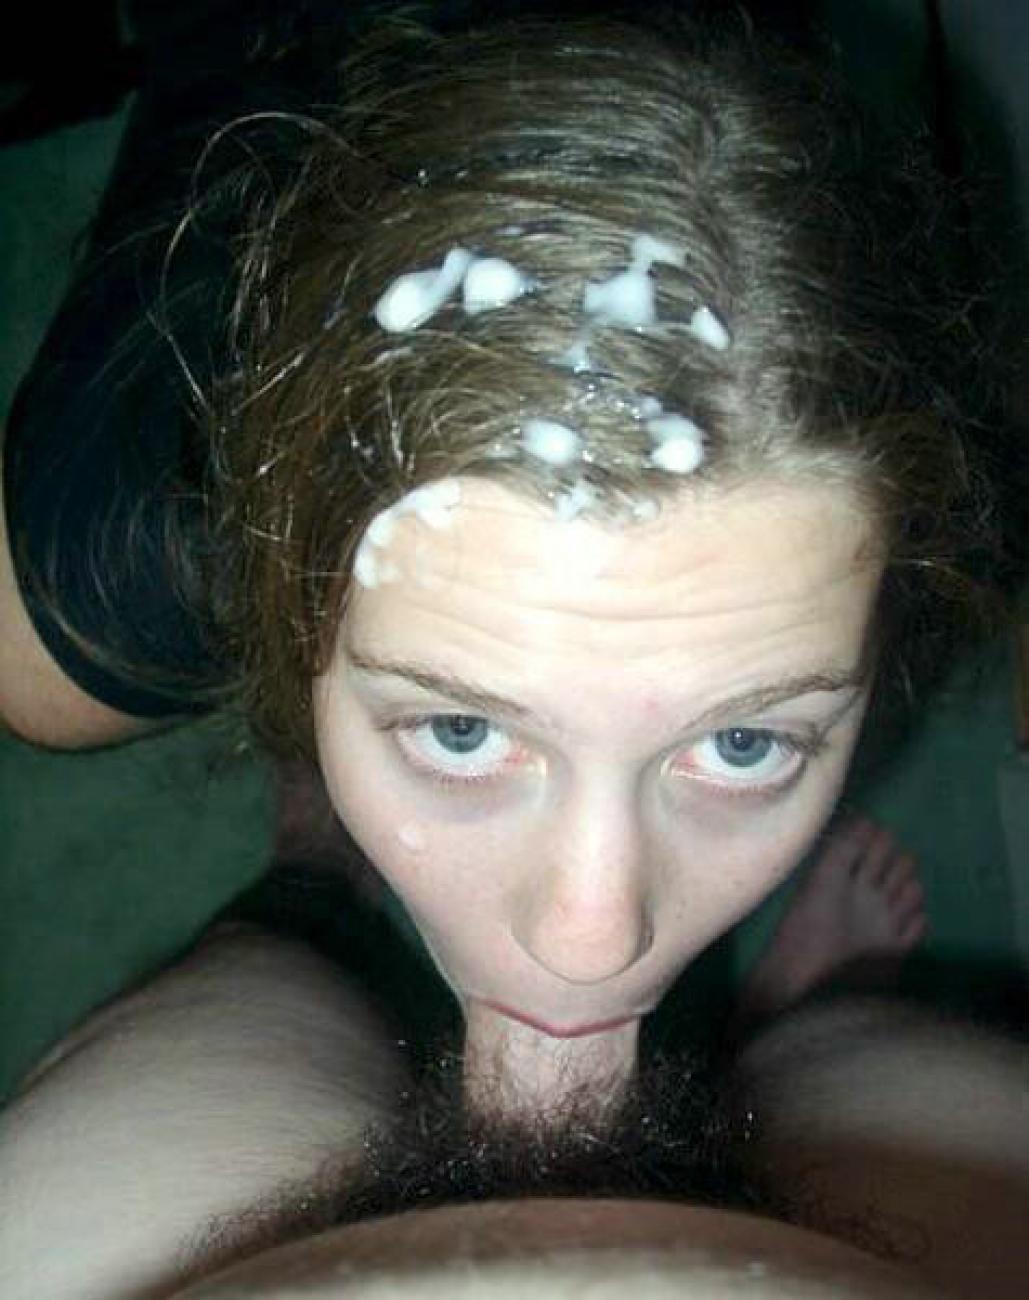 Picture tagged with: Blowjob, Brunette, Cumshot, Deepthroat, Eyes, Facial -...